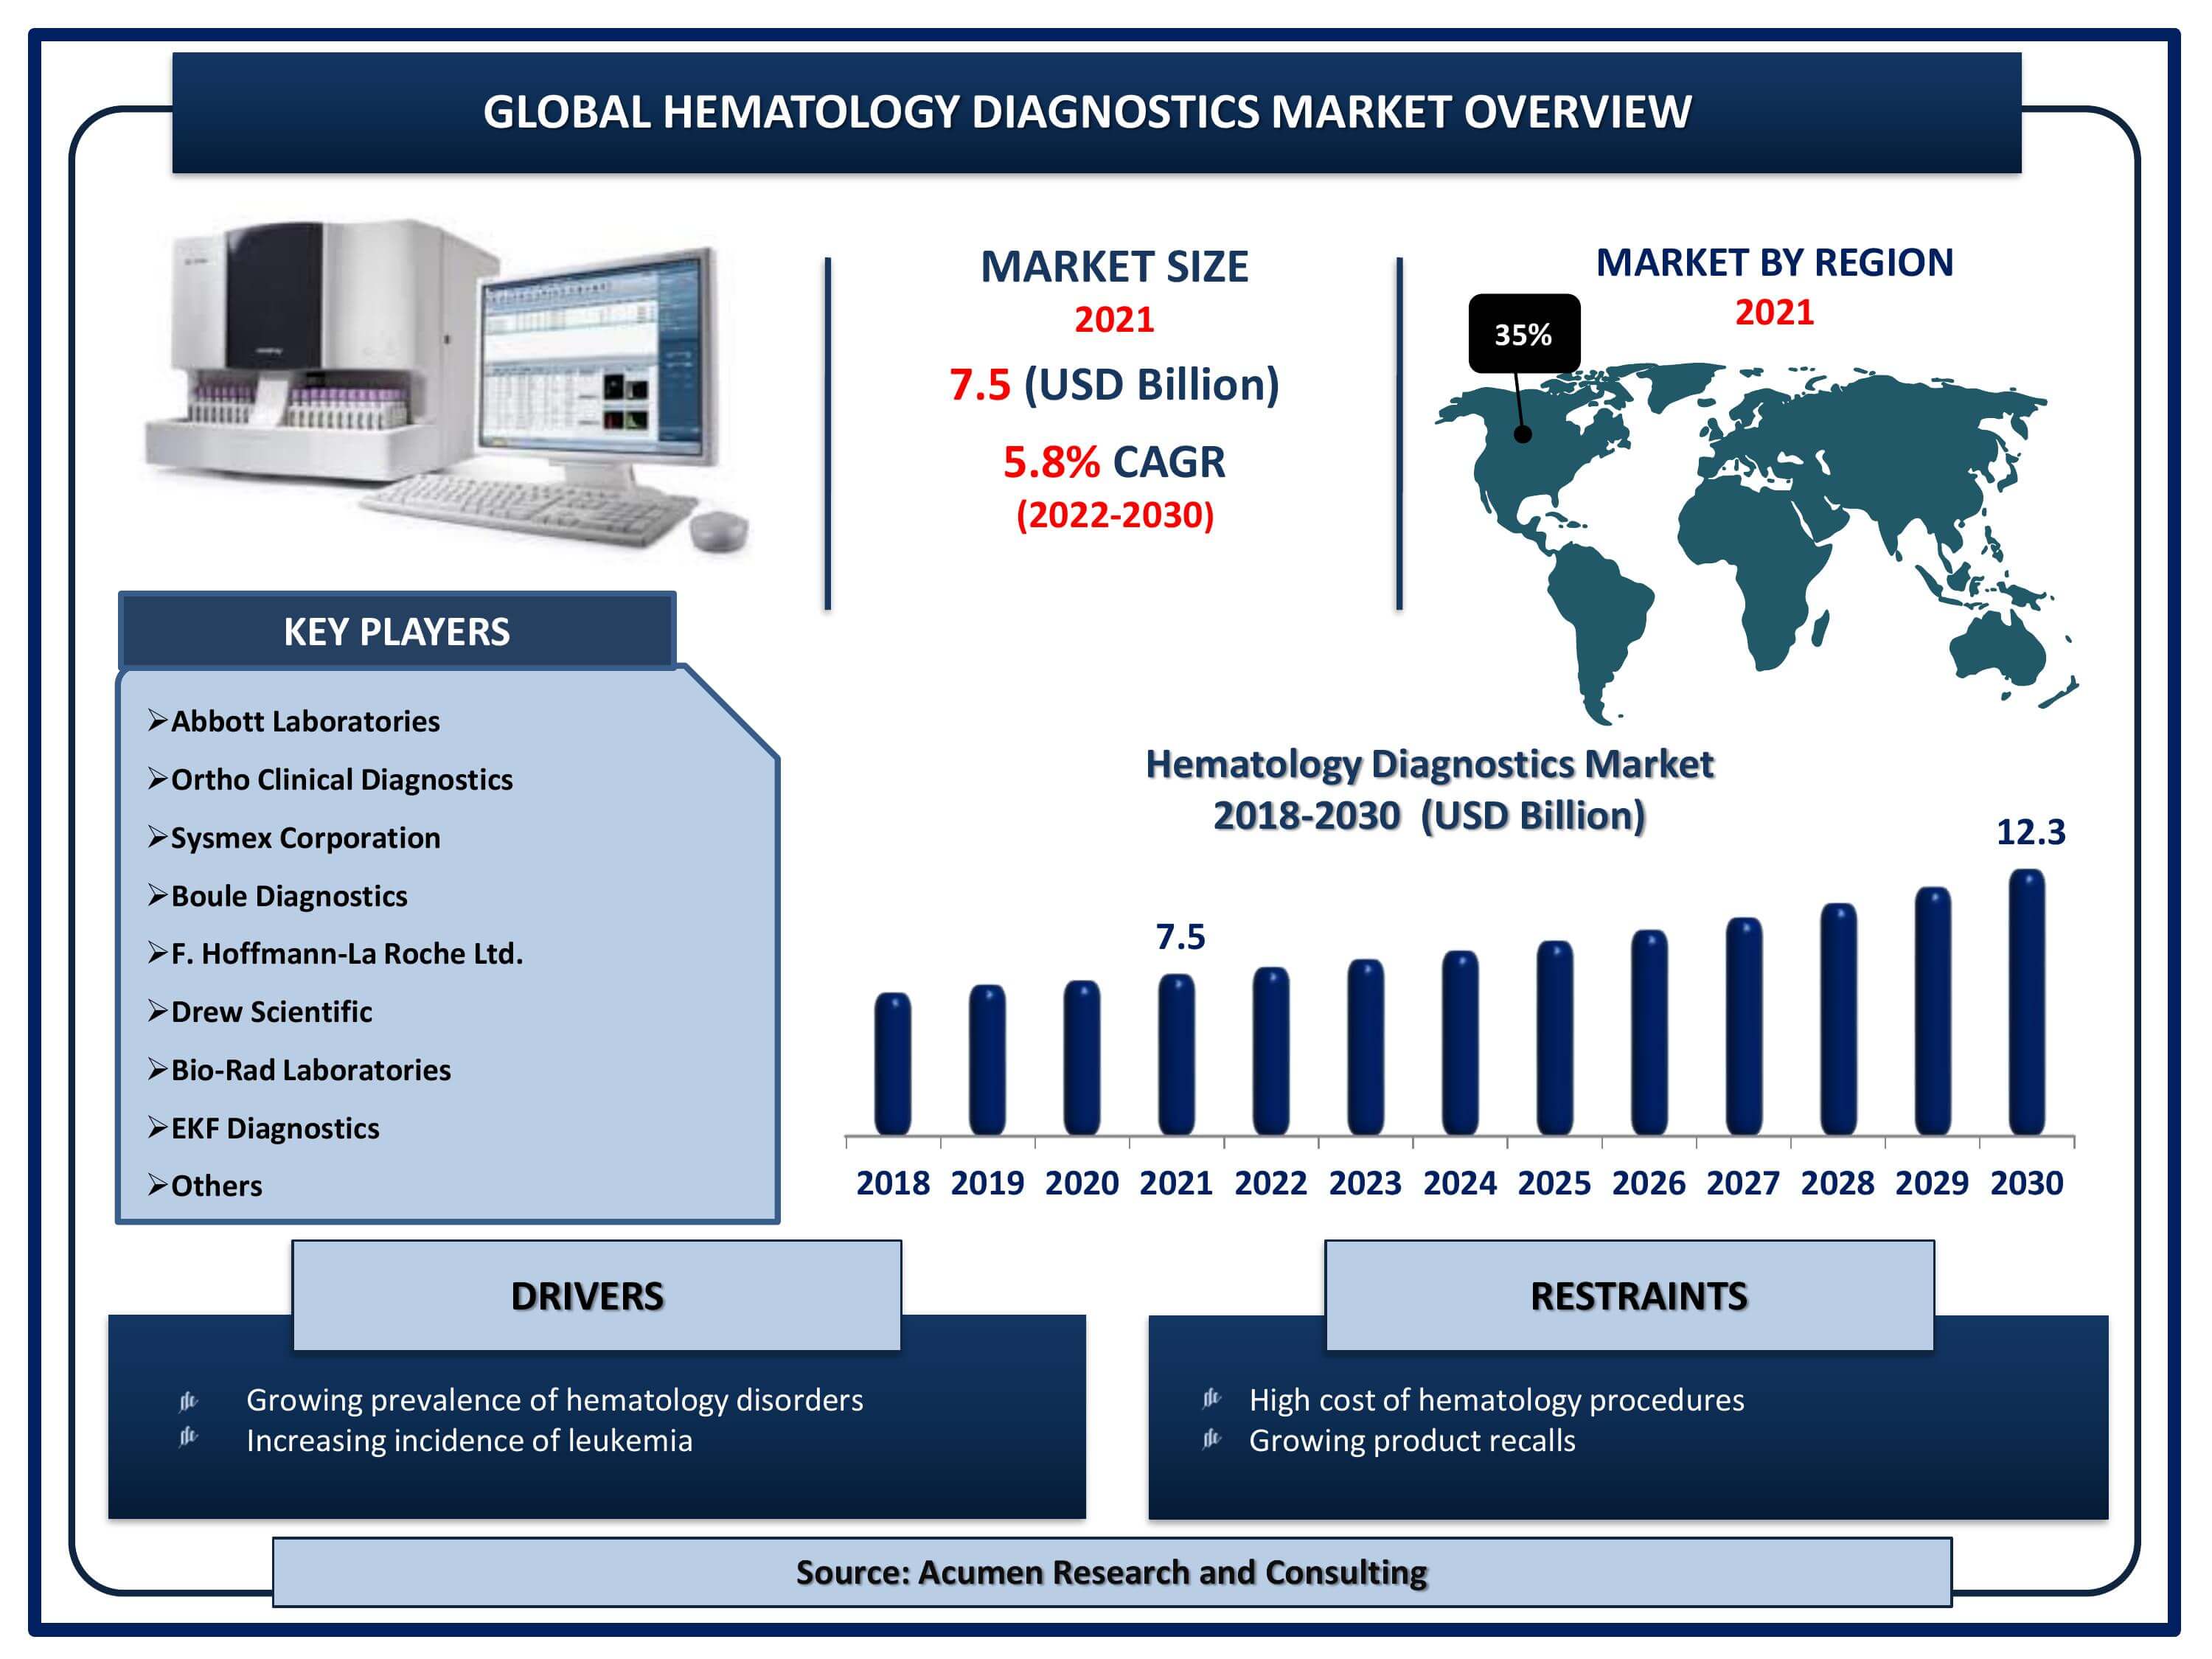 Global hematology diagnostics market revenue is estimated to reach USD 12.3 Billion by 2030 with a CAGR of 5.8% from 2022 to 2030